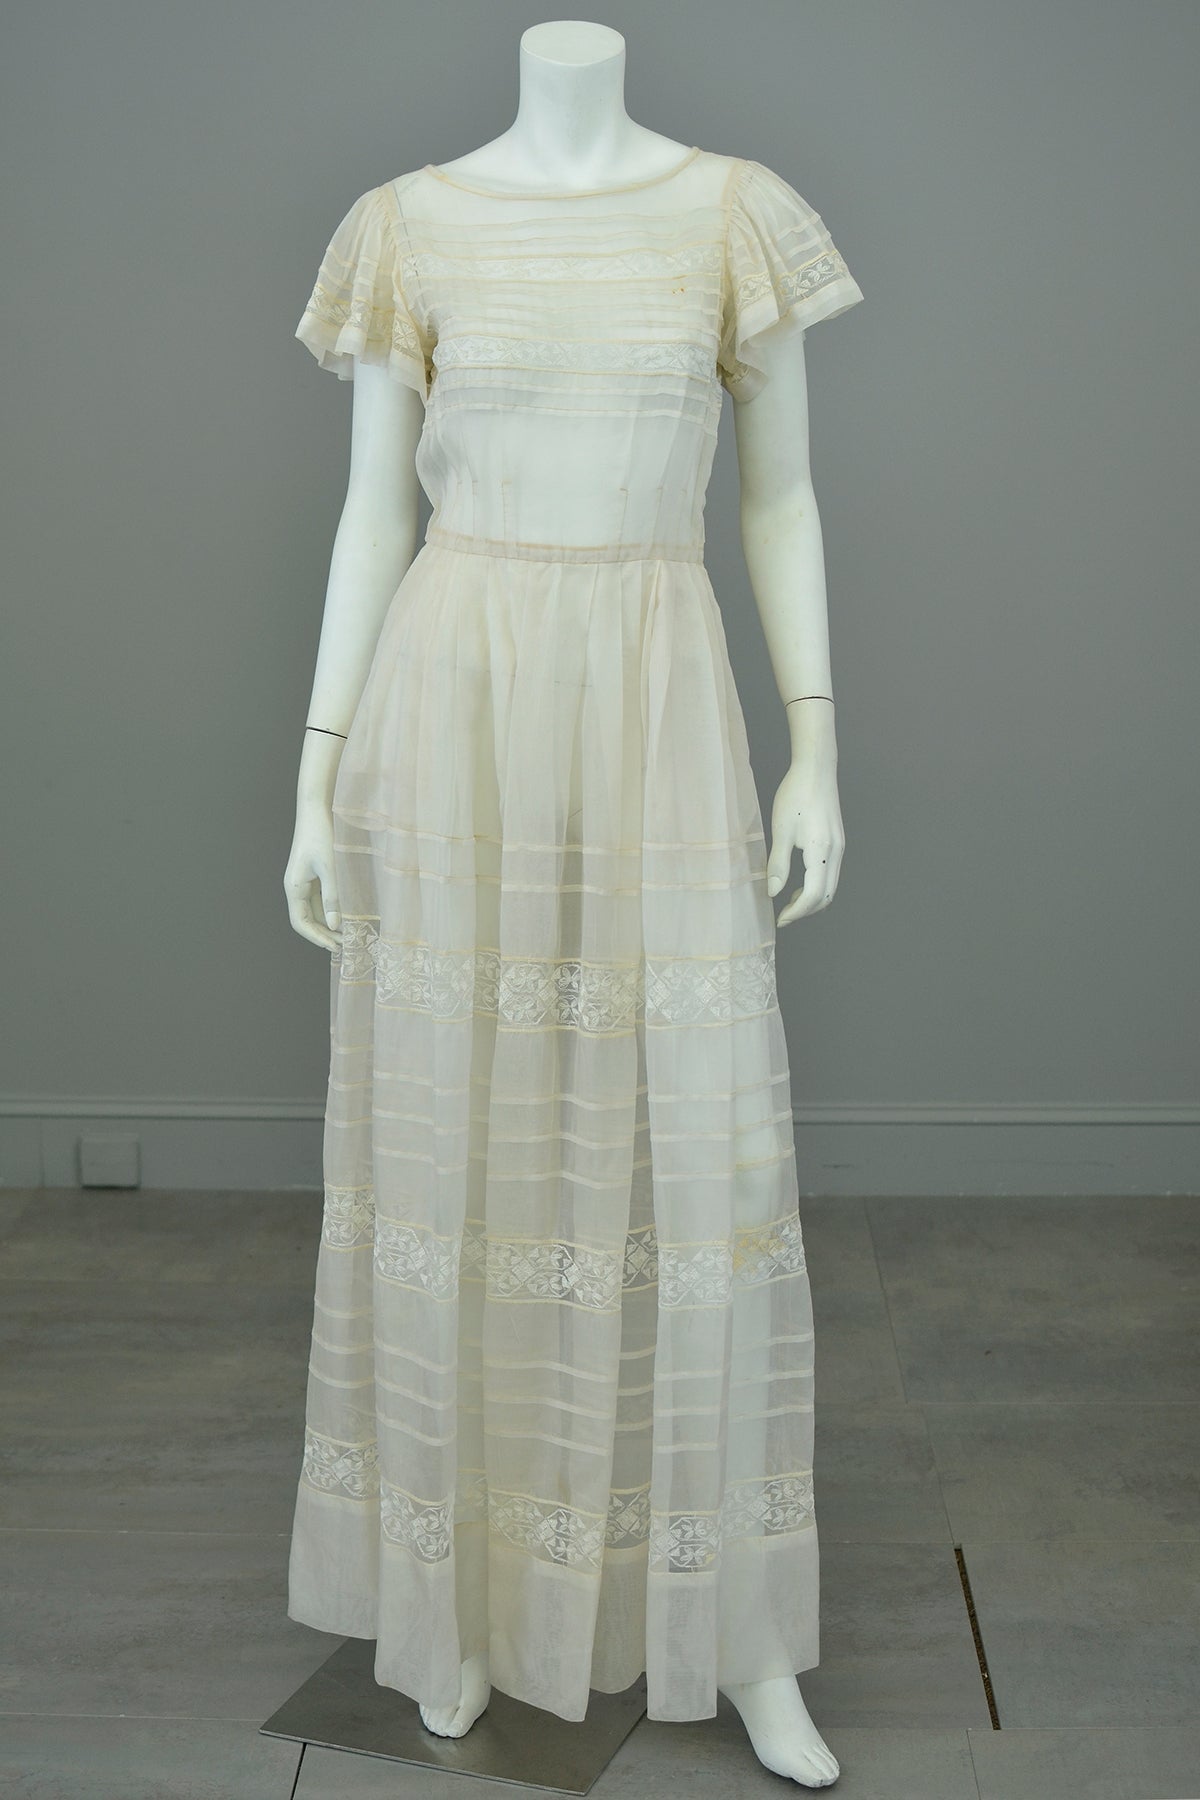 1970s Lovely Sheer Cream Tiered Panel Gown with Flutter Sleeves | 70s Peasant Gown